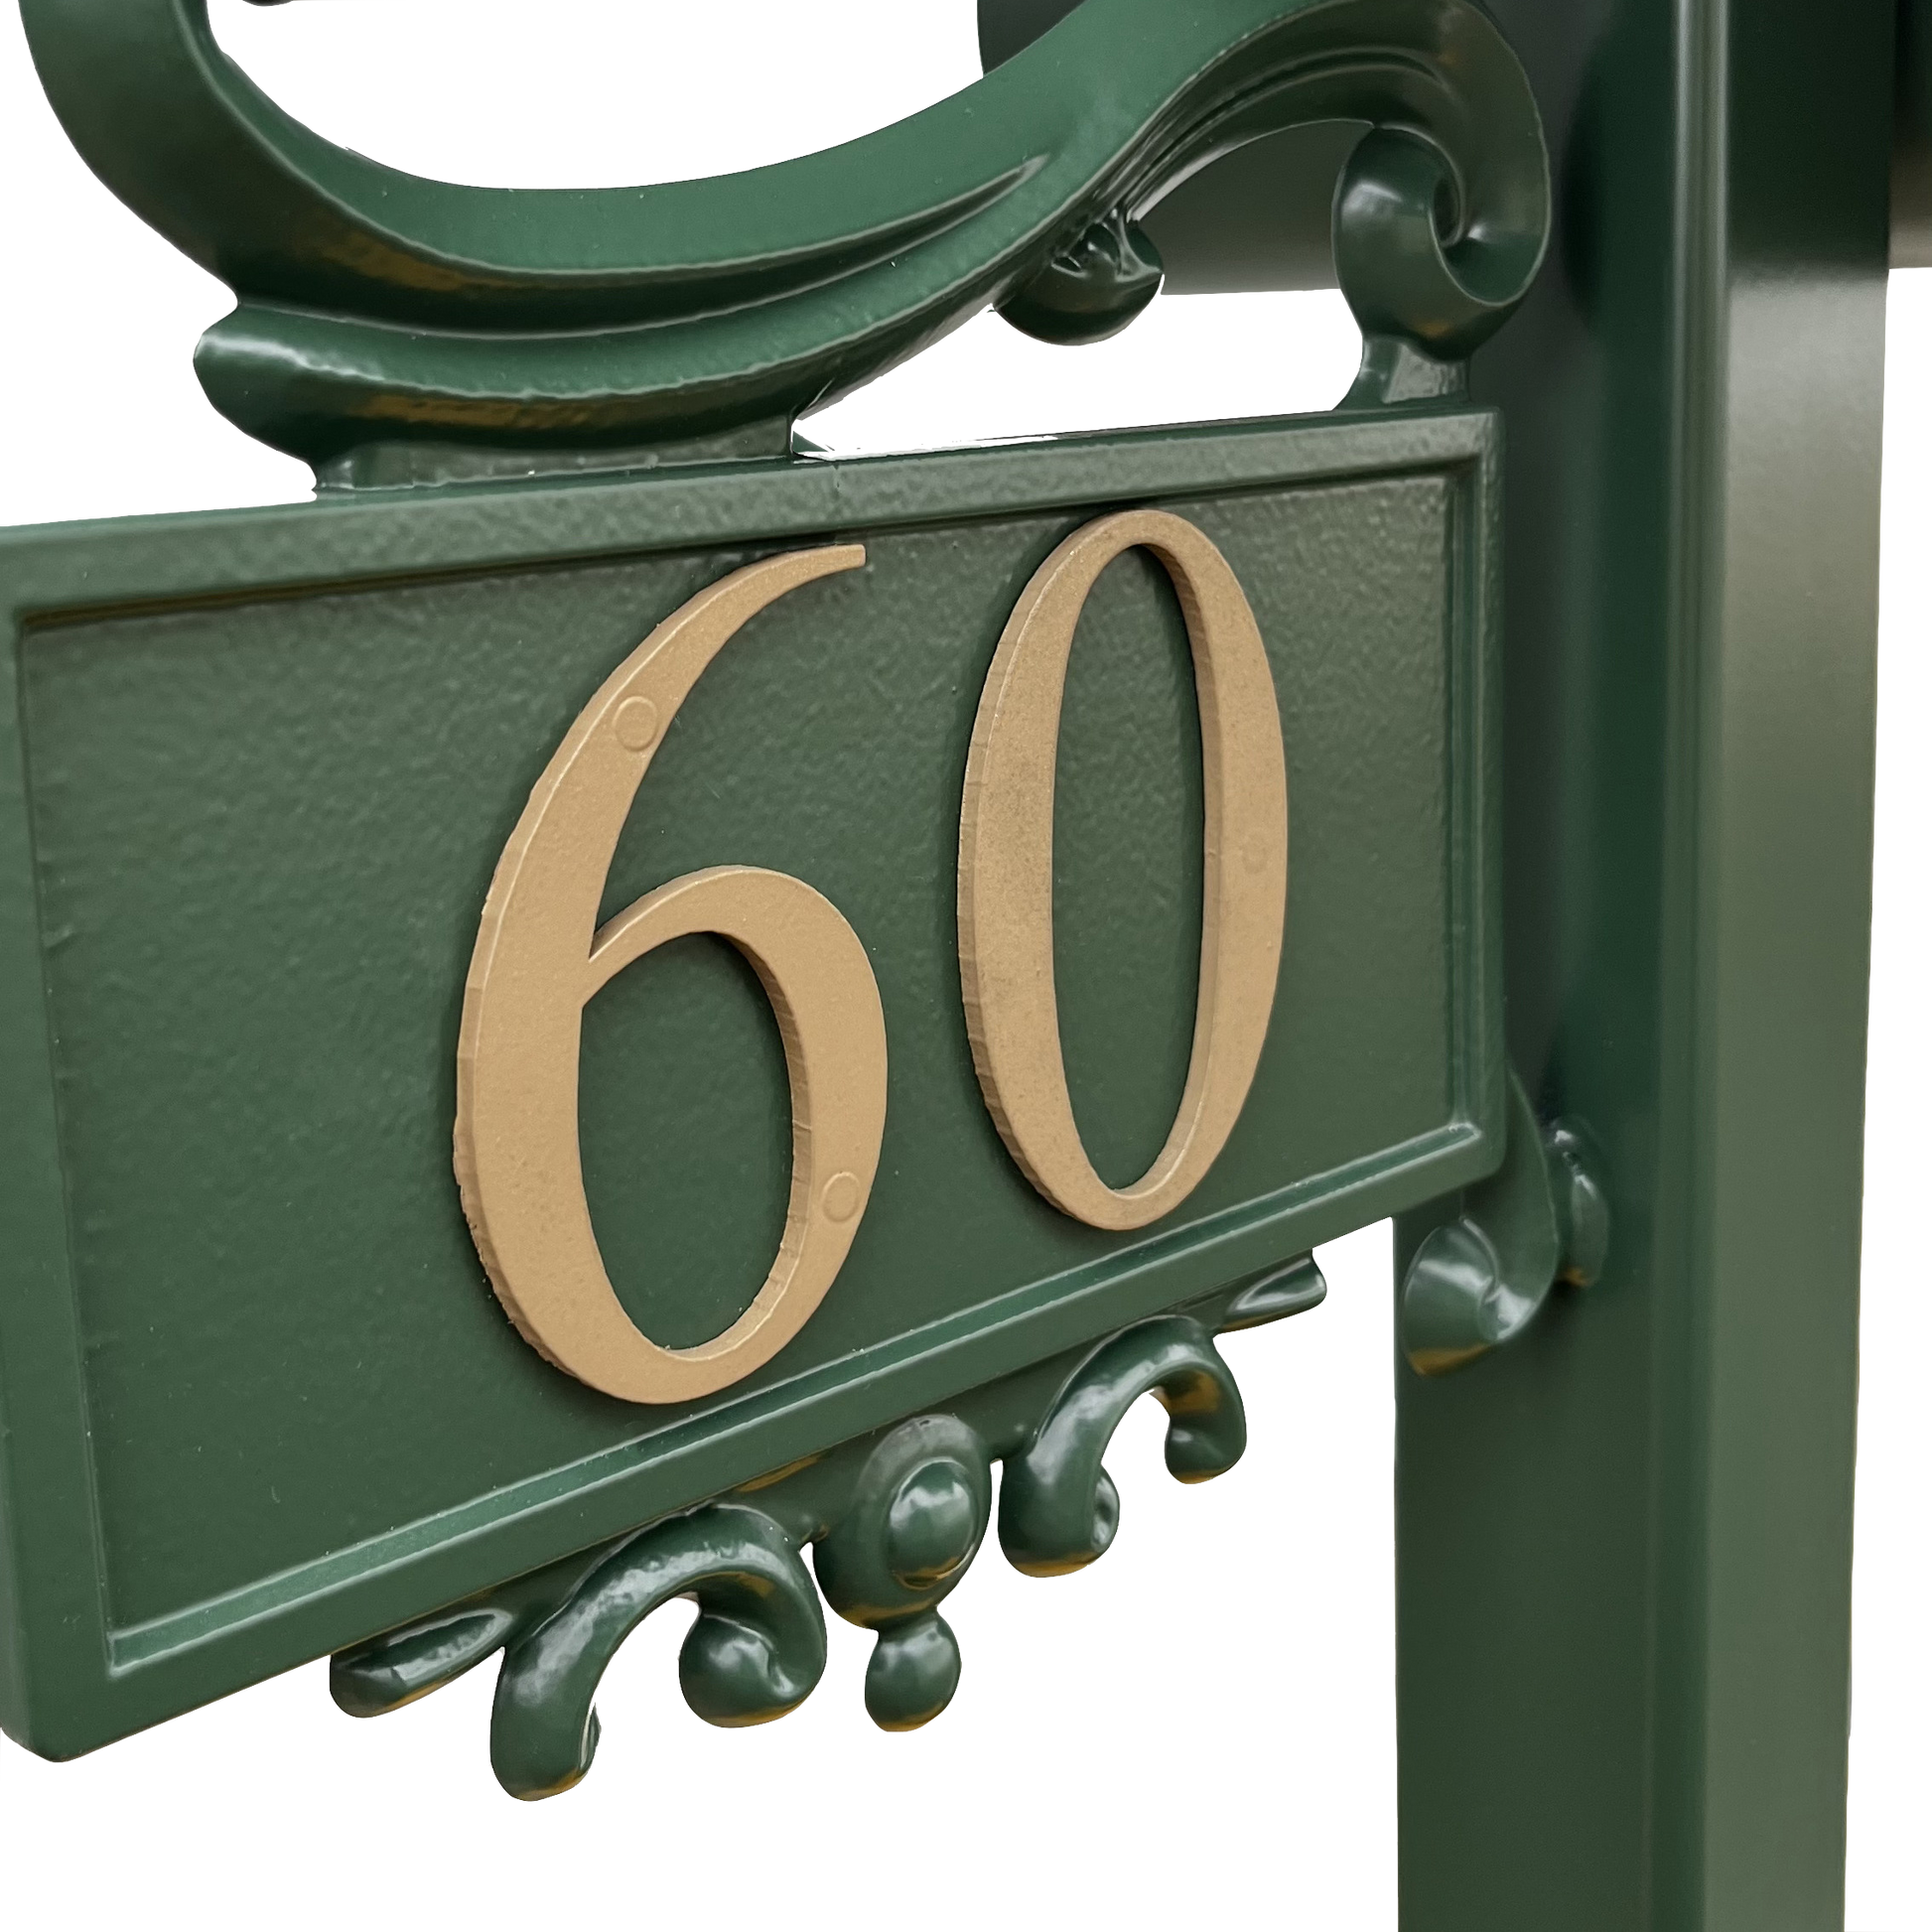 bolt on gold letterbox numbers